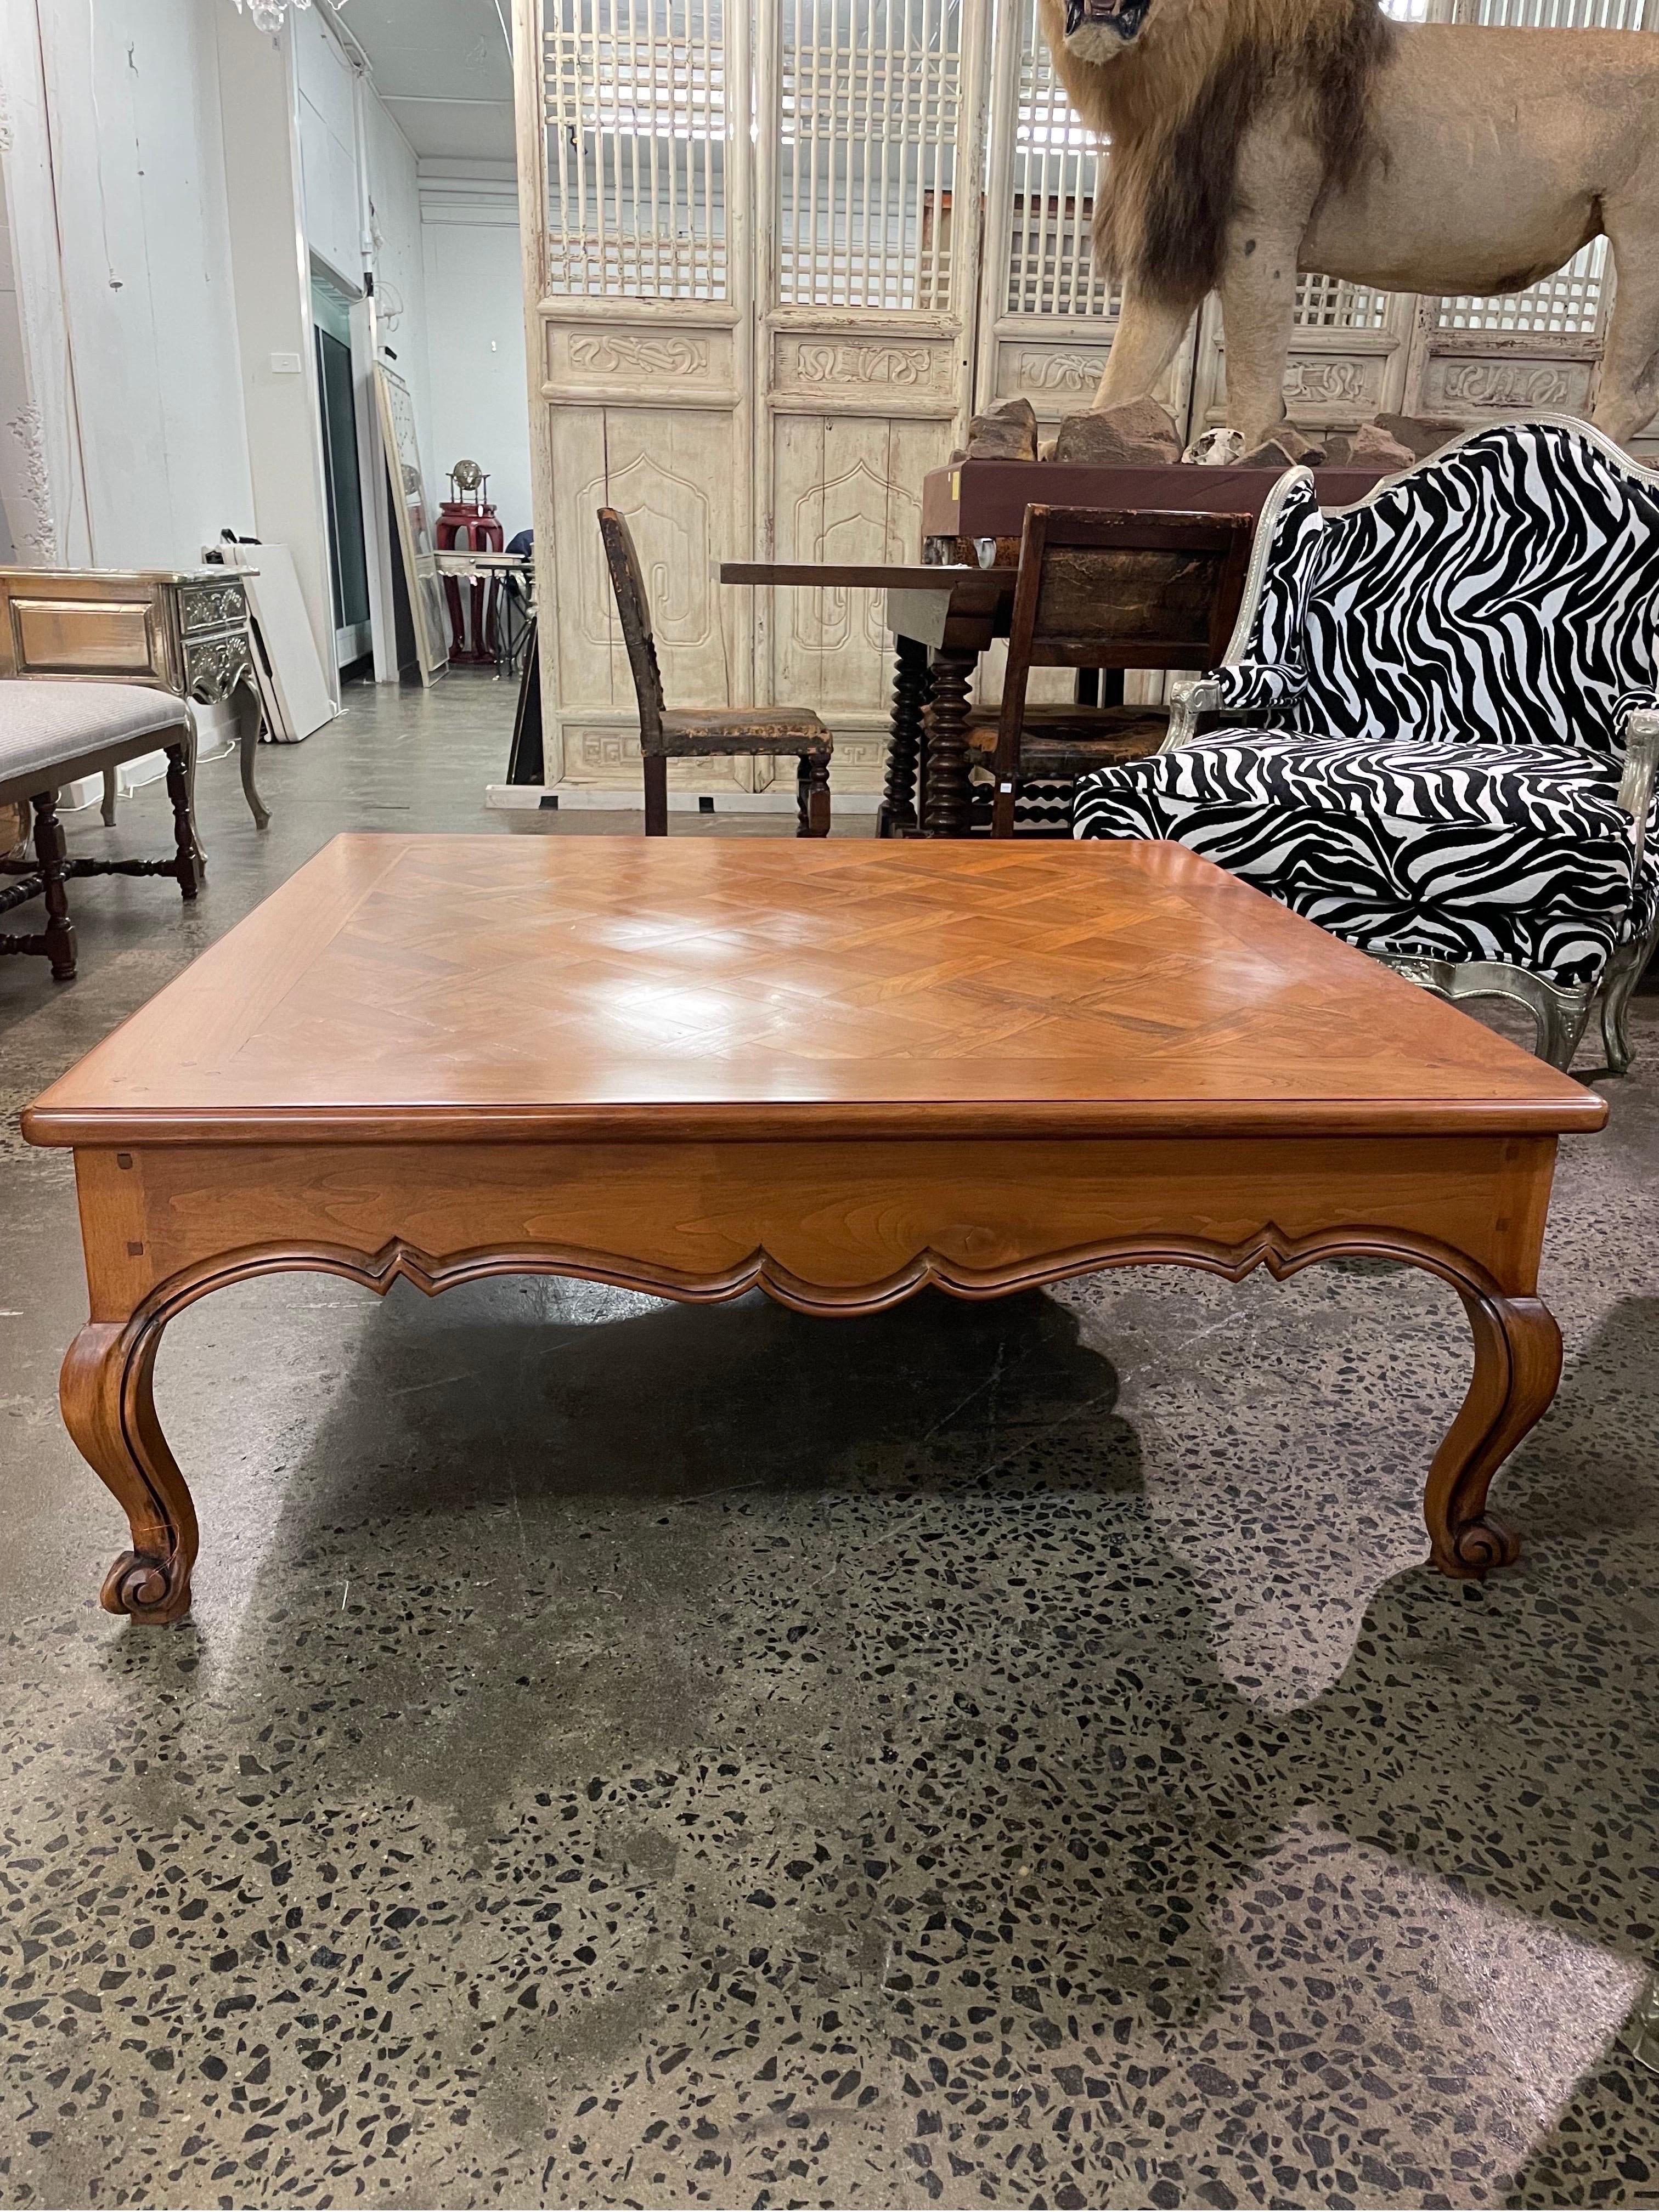 A Square French Provincial Style Parquetry Coffee Table

Provenance: Private Melbourne Collection

Dimension: Height: 45 cm Width: 120 cm Depth: 120 cm.